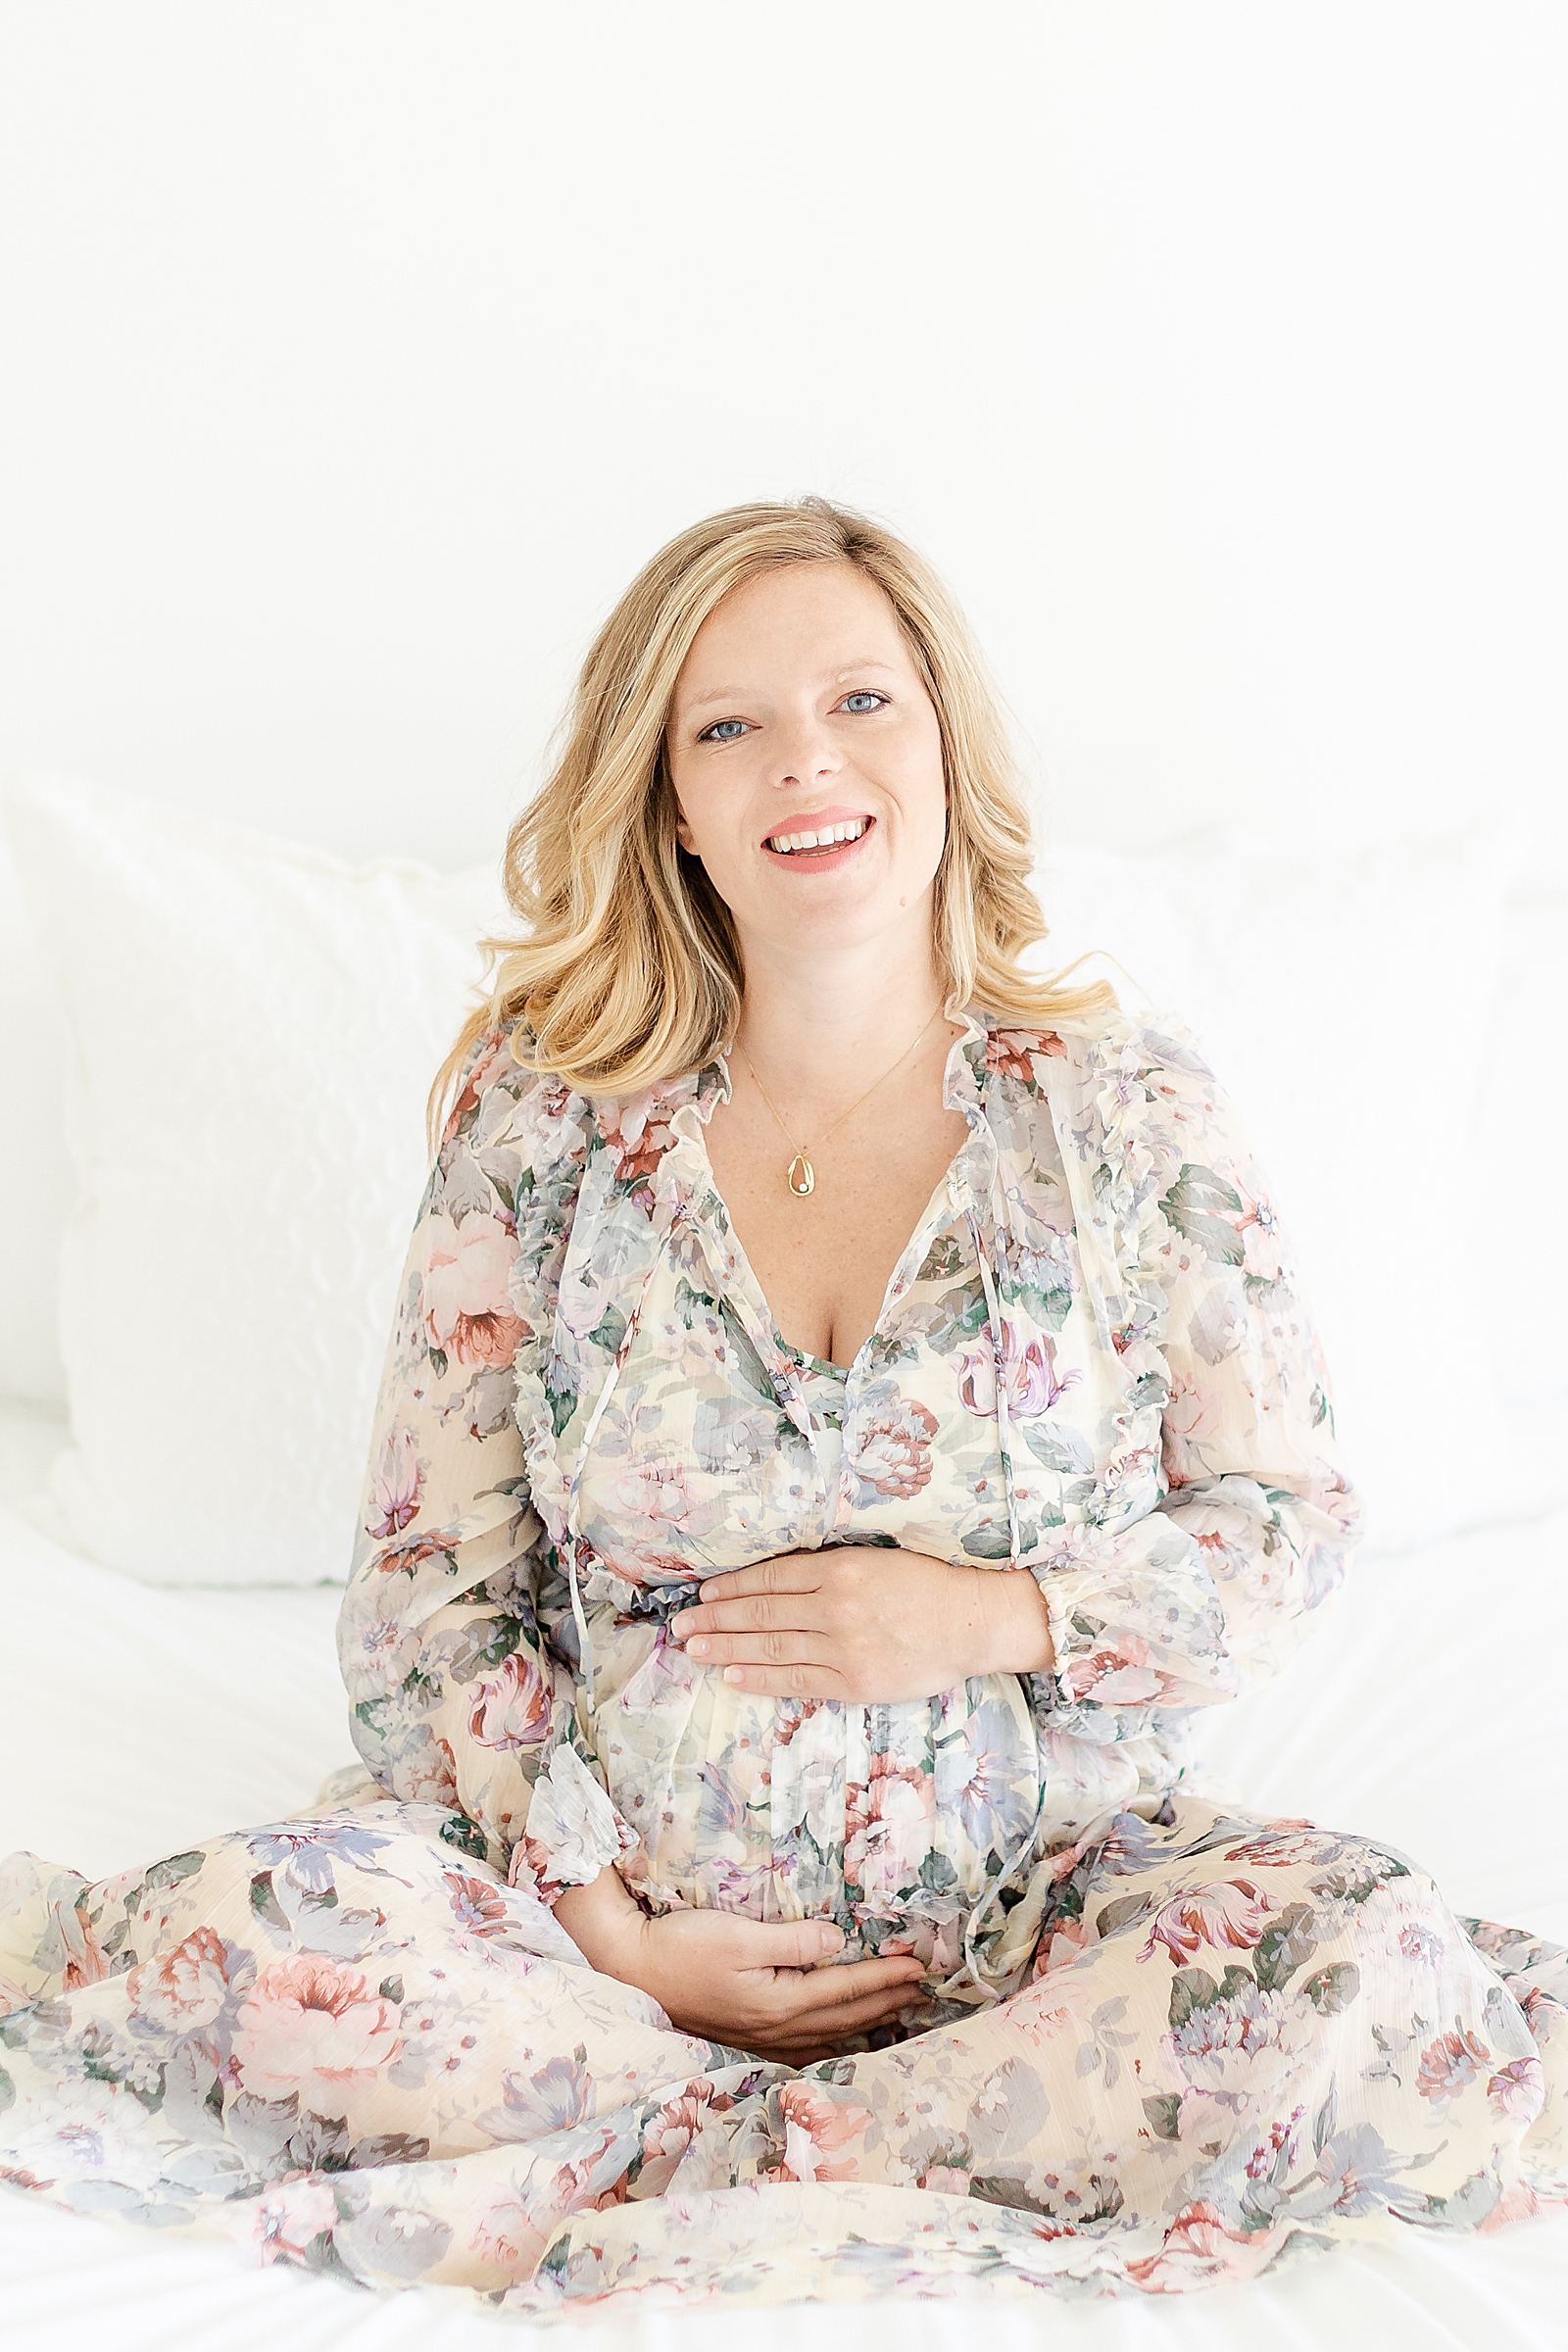 Blonde pregnant mom in floral dress sitting on white bed holding baby bump smiling at camera